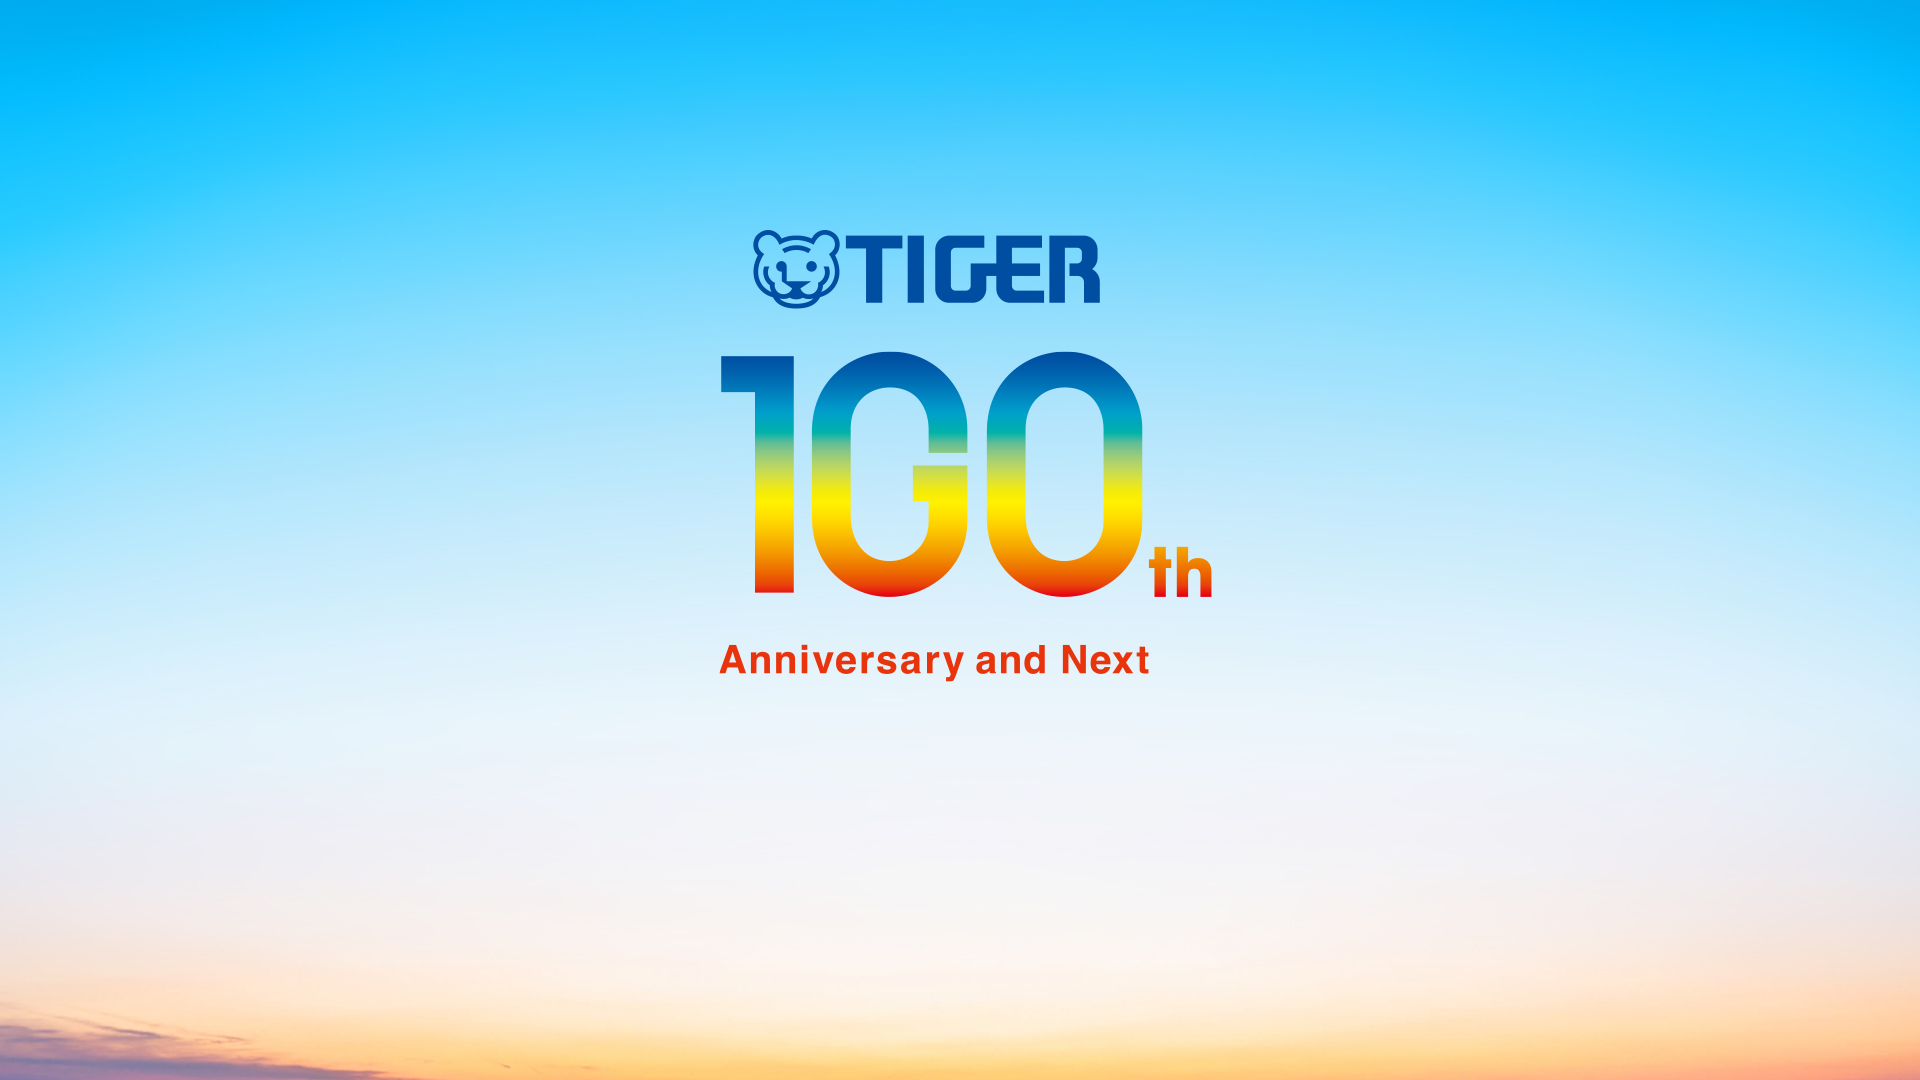 Tiger is 100 years old